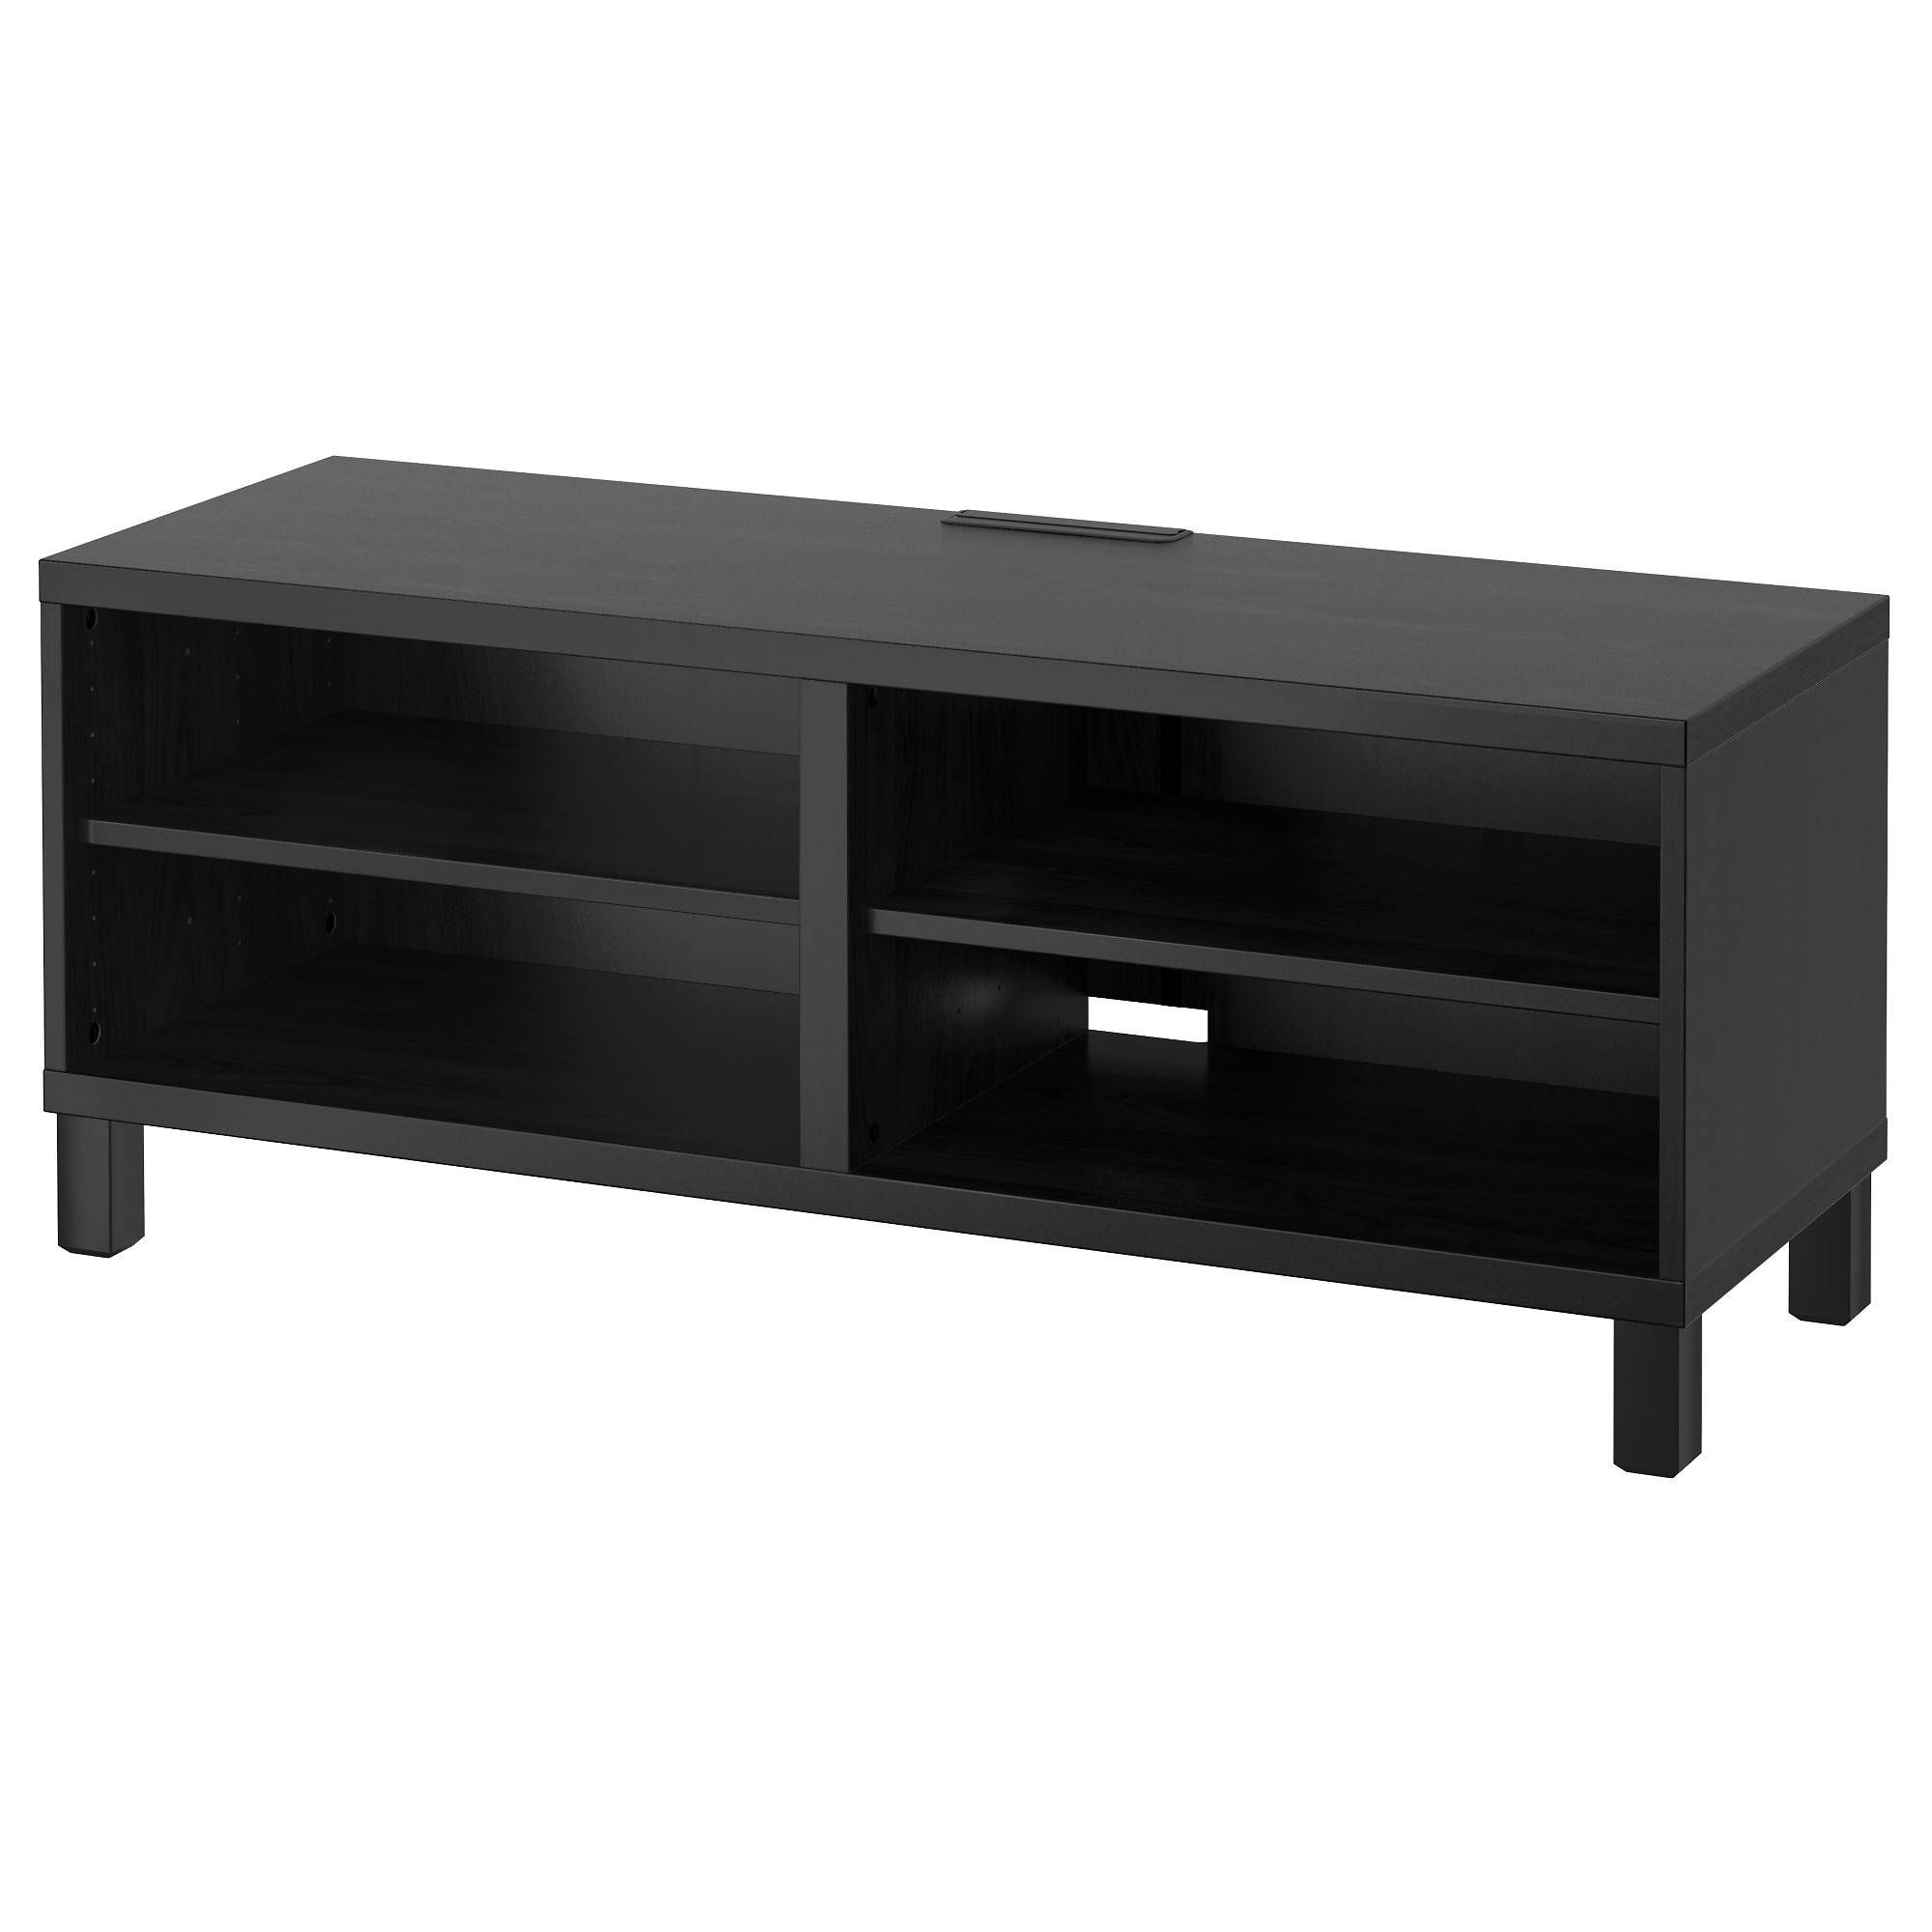 Bestå Tv Bench Black Brown 120x40x48 Cm – Ikea Intended For Bench Tv Stands (View 3 of 15)